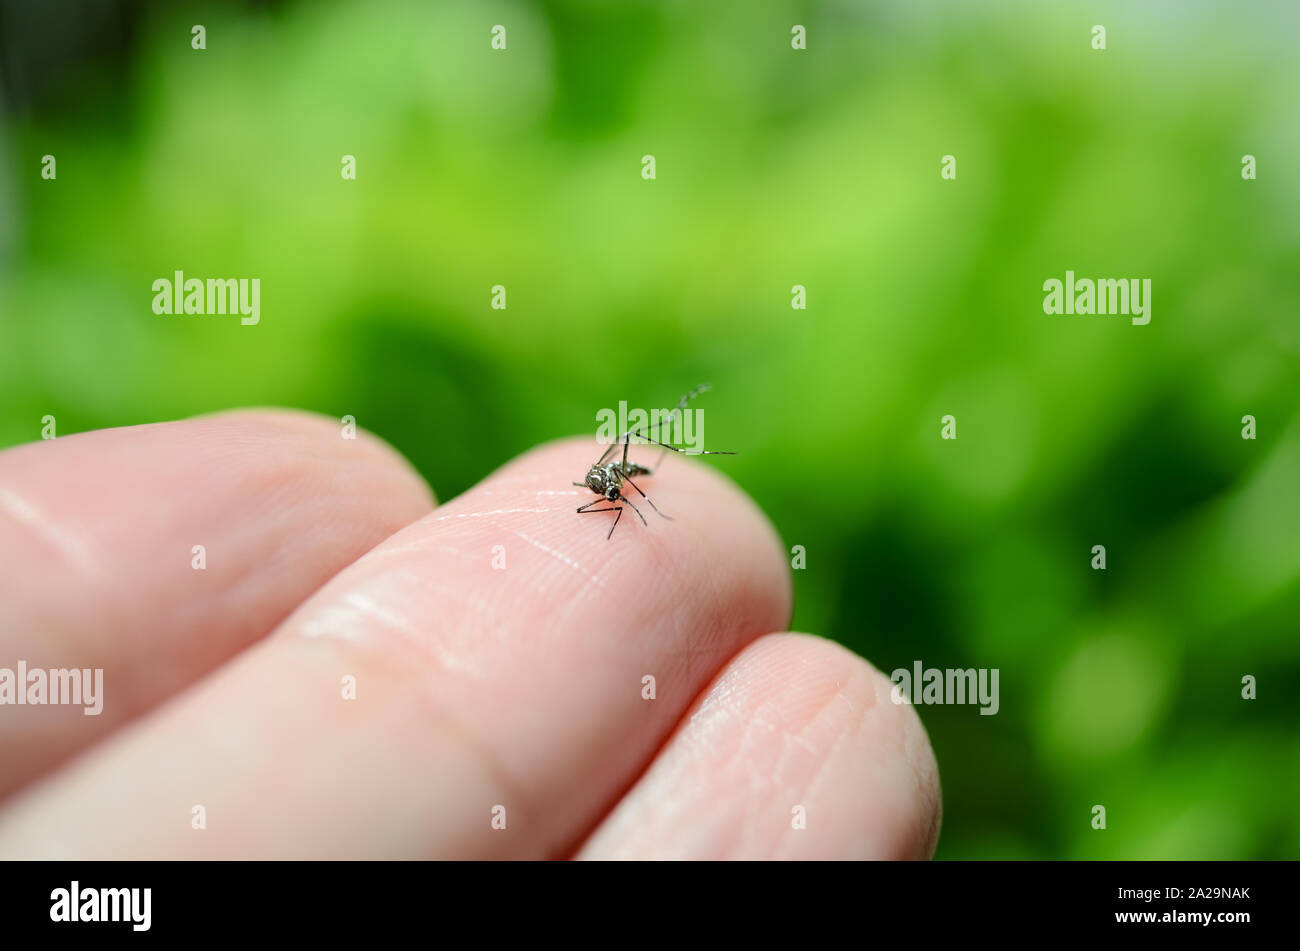 Aedes aegypti mosquito on finger with blurry green background Stock Photo